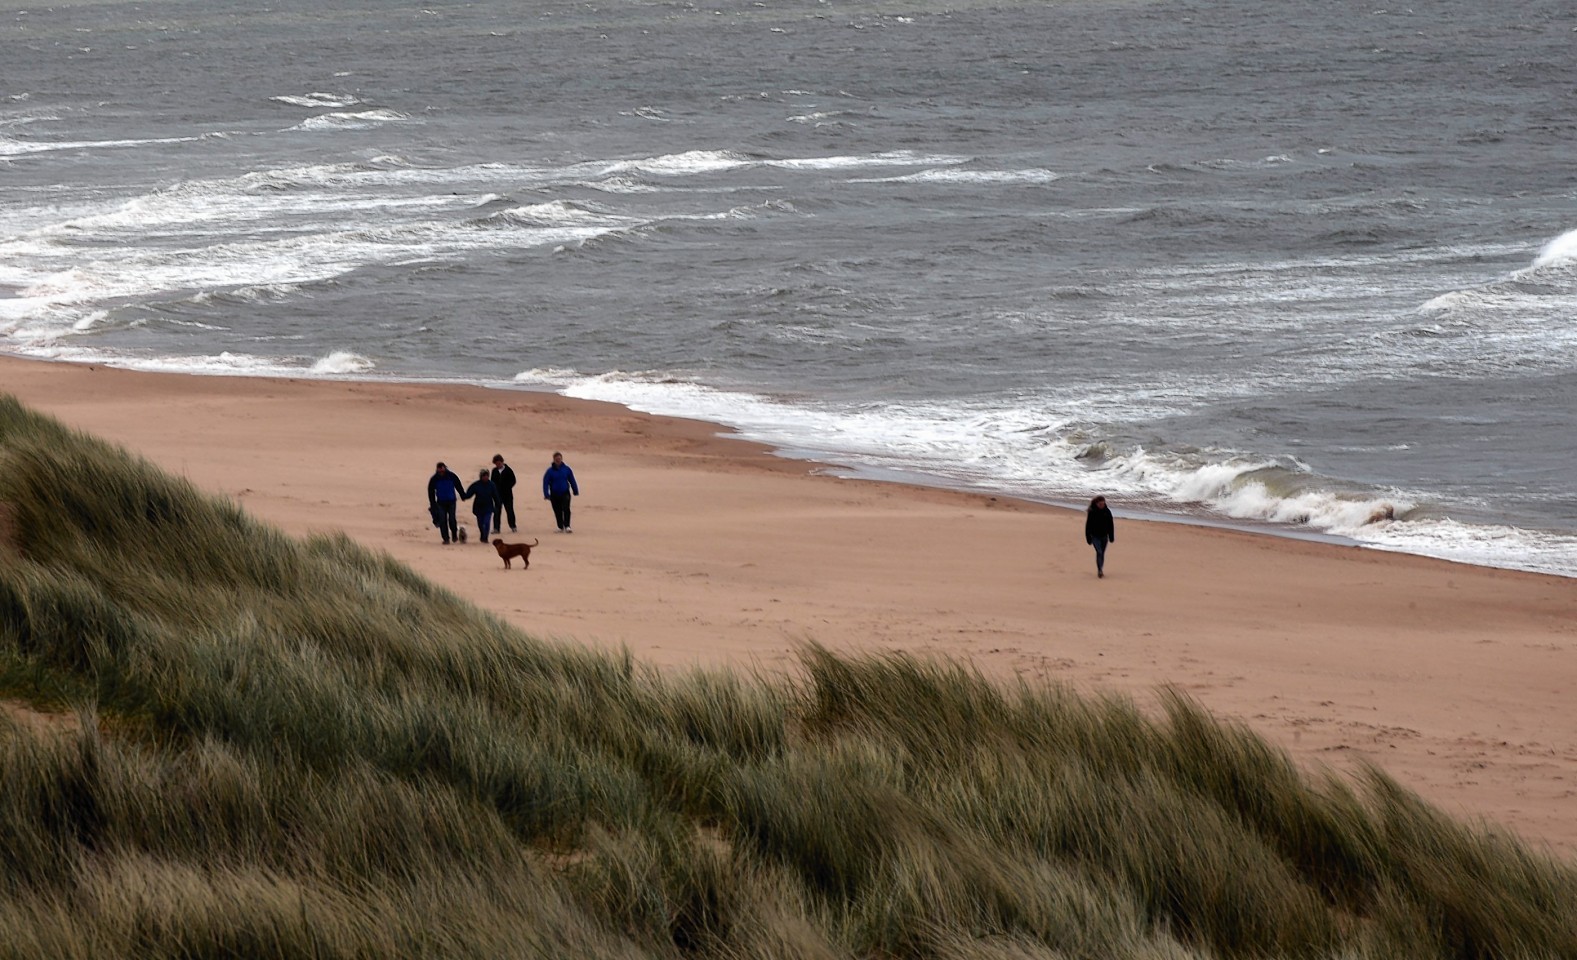 Storm clouds and high winds gather this morning at Balmedie beach